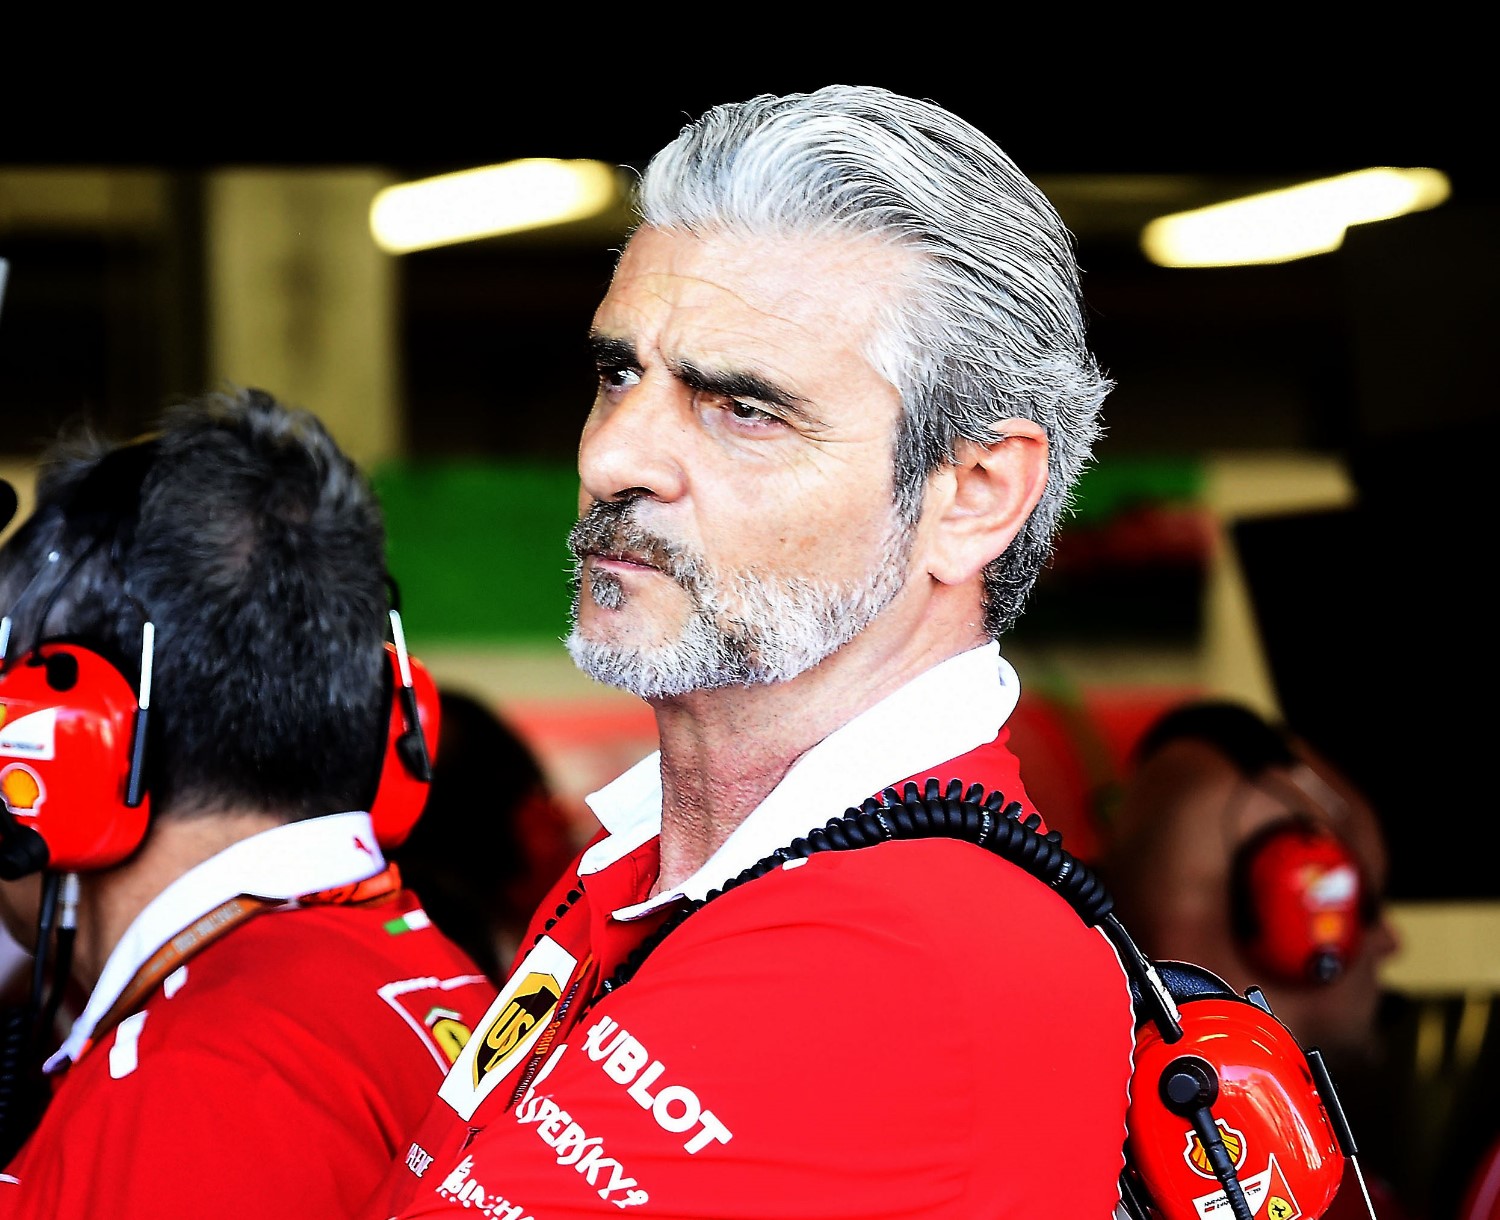 Besides himself, Vettel reveals Arrivabene's contract is also up for renewal